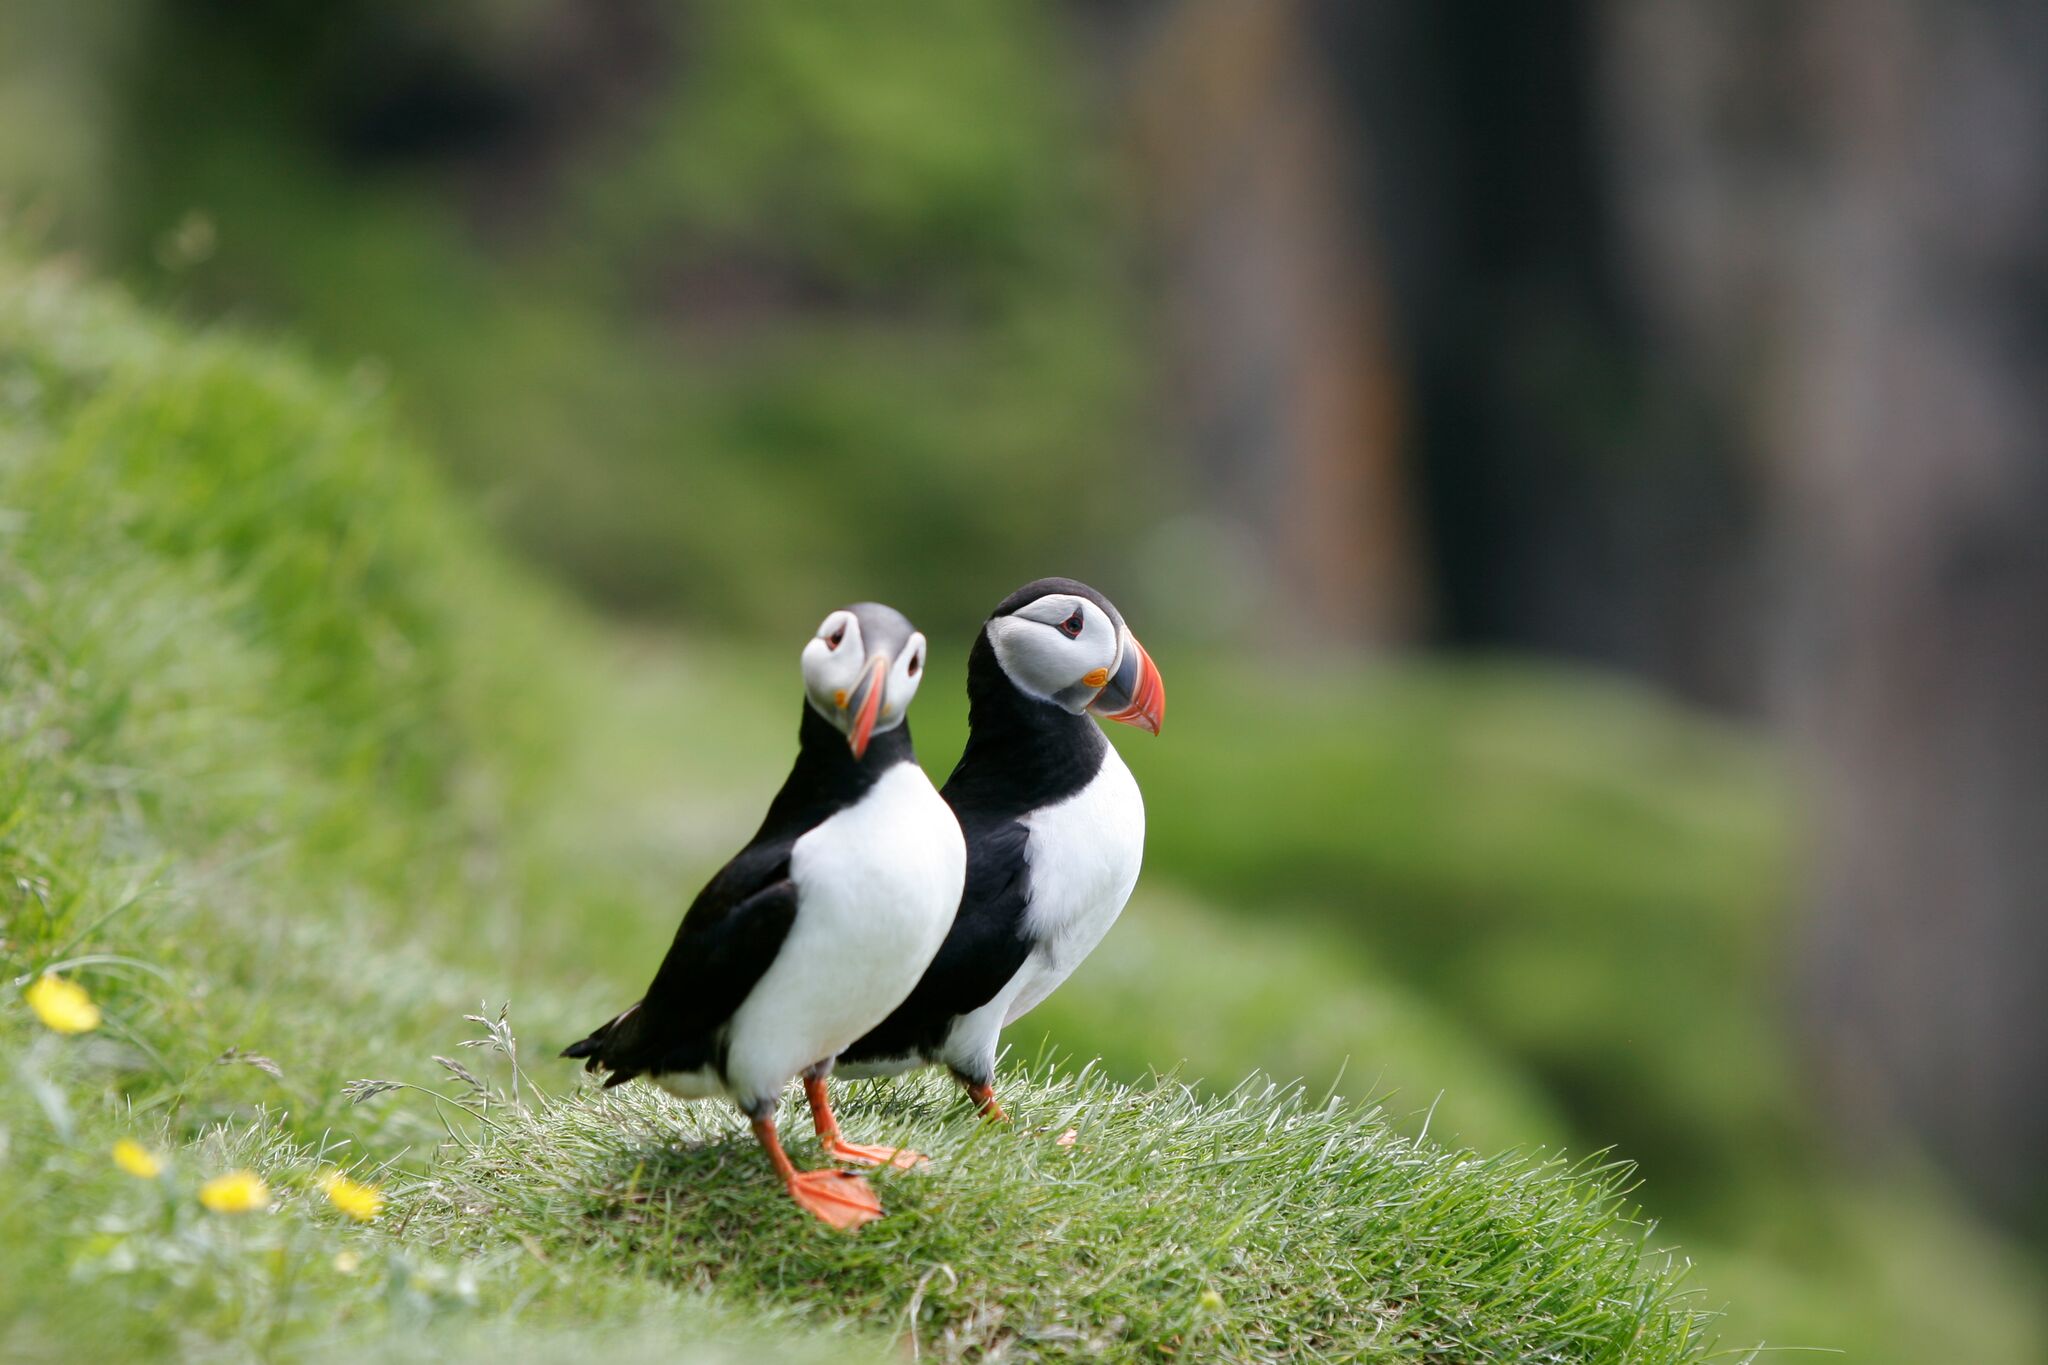 Best Whale Watching & Puffin Tours | Guide to Iceland